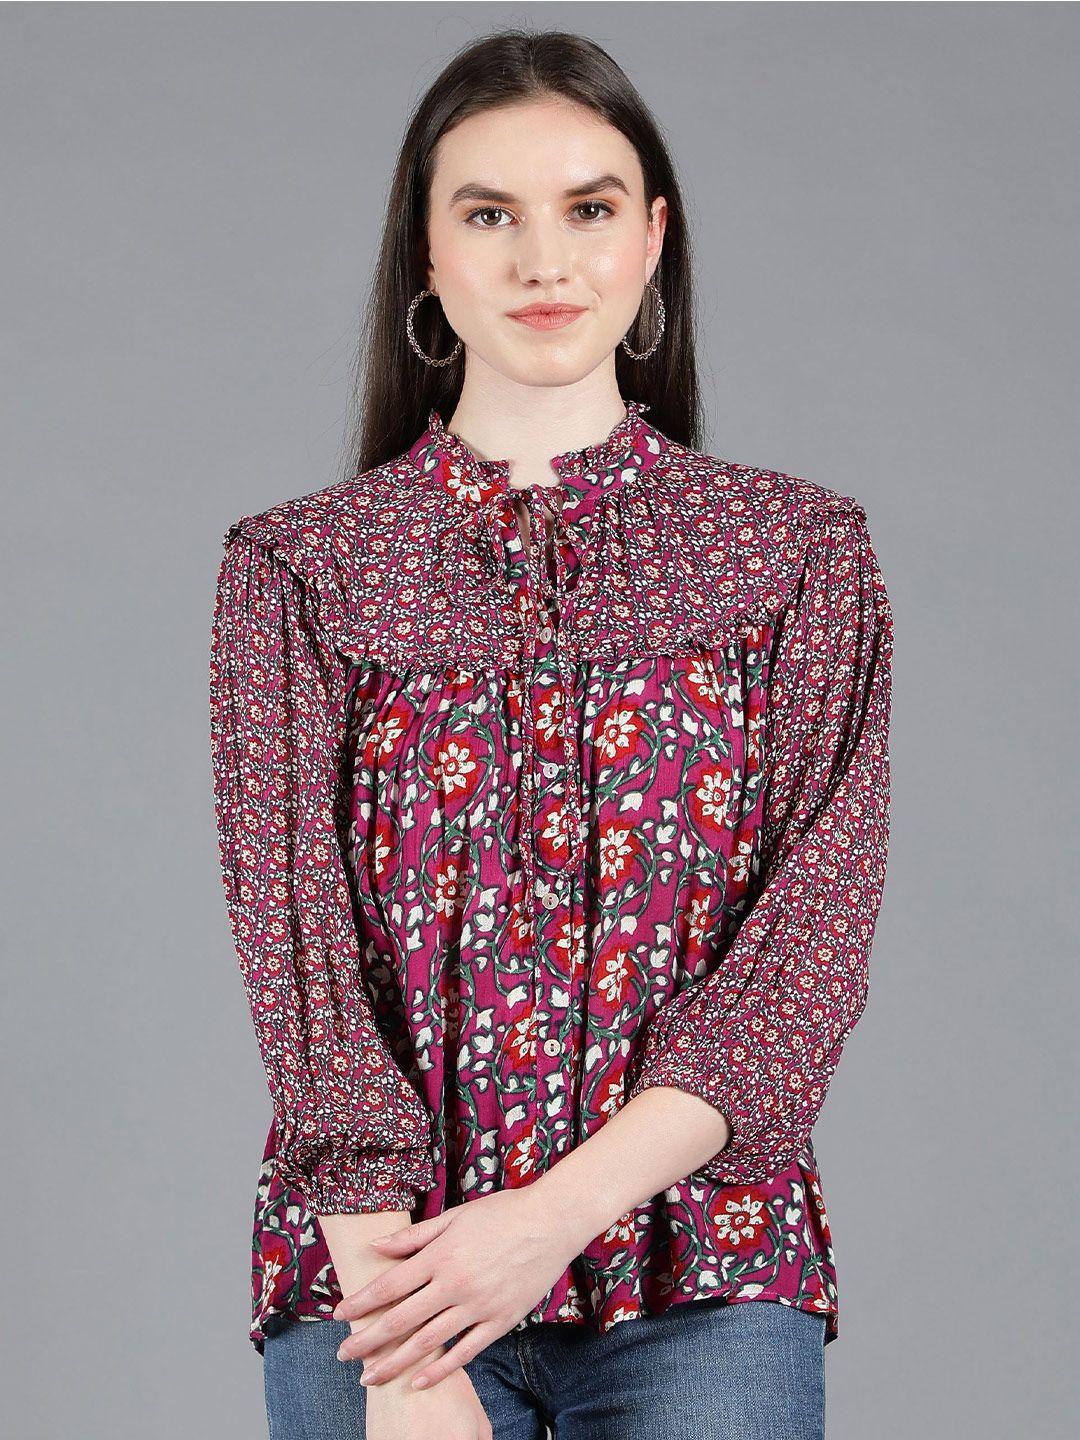 amagyaa floral printed tie-up neck shirt style top